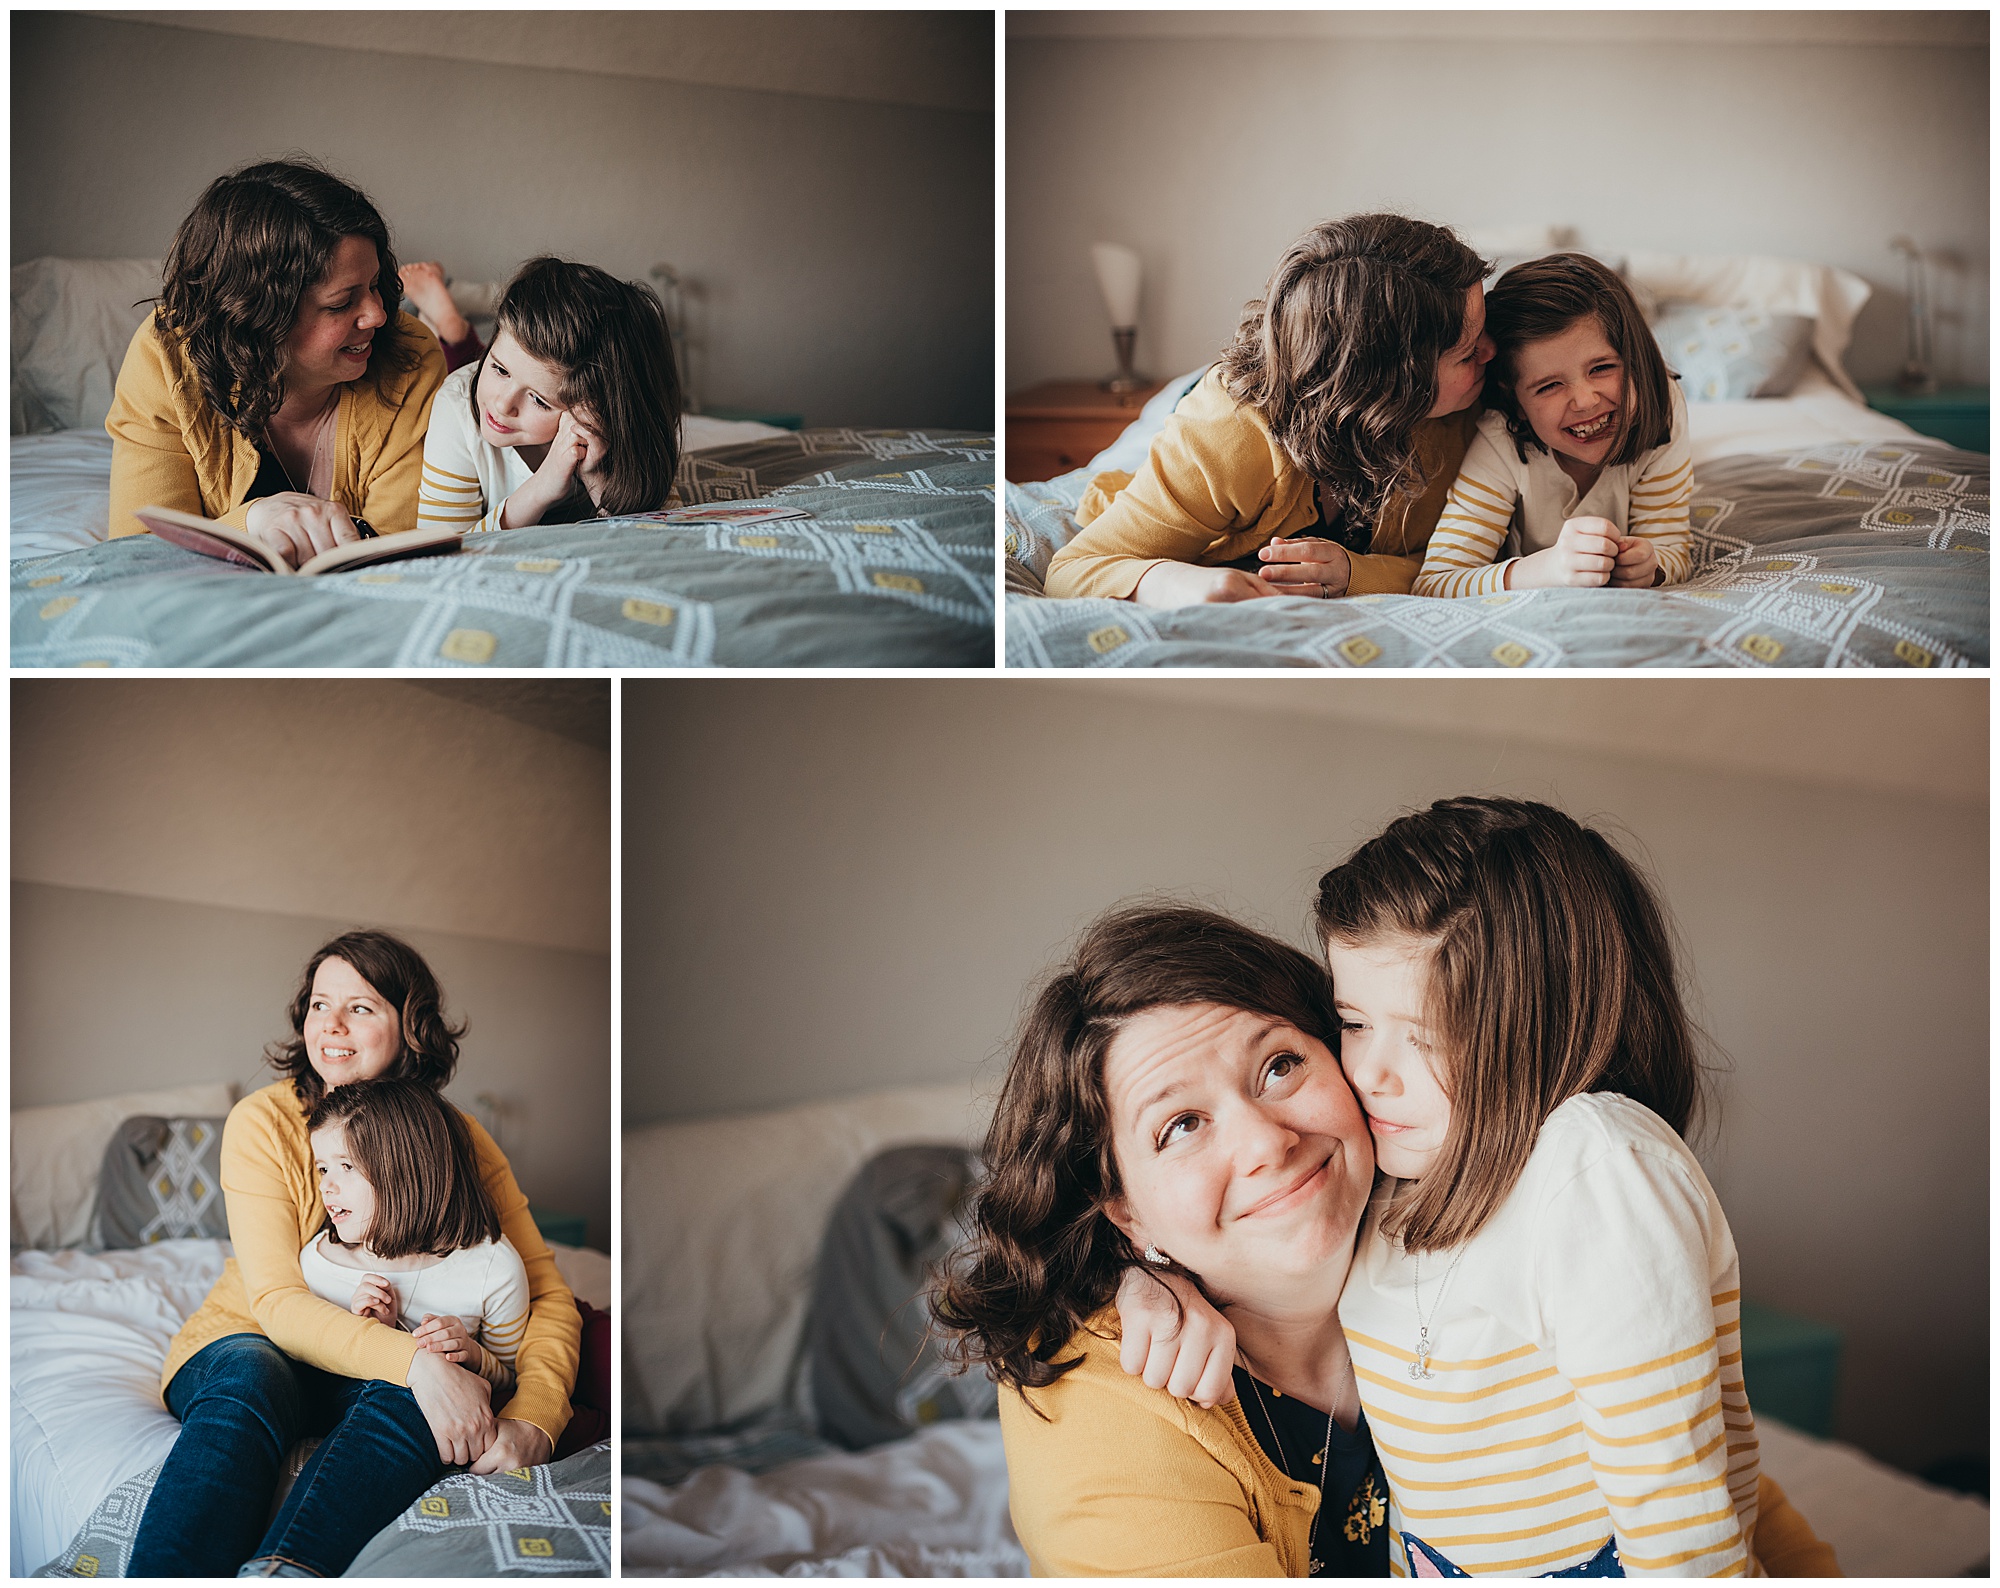 Collage of mom and daughter cuddling on bed looking out window Emily Ann Photography Seattle Photographer